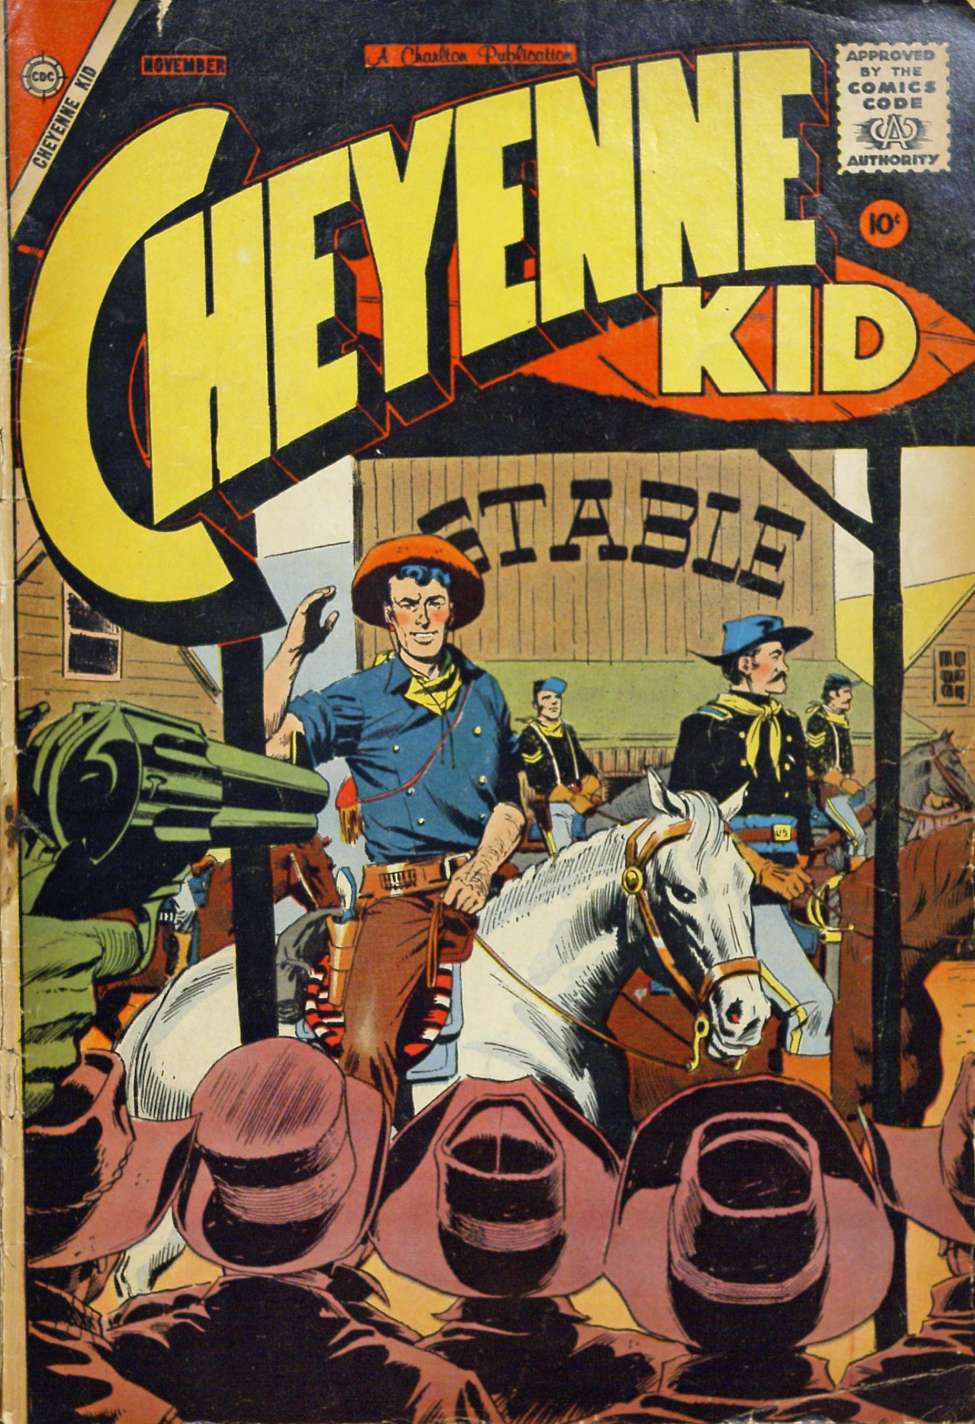 Book Cover For Cheyenne Kid 14 - Version 1